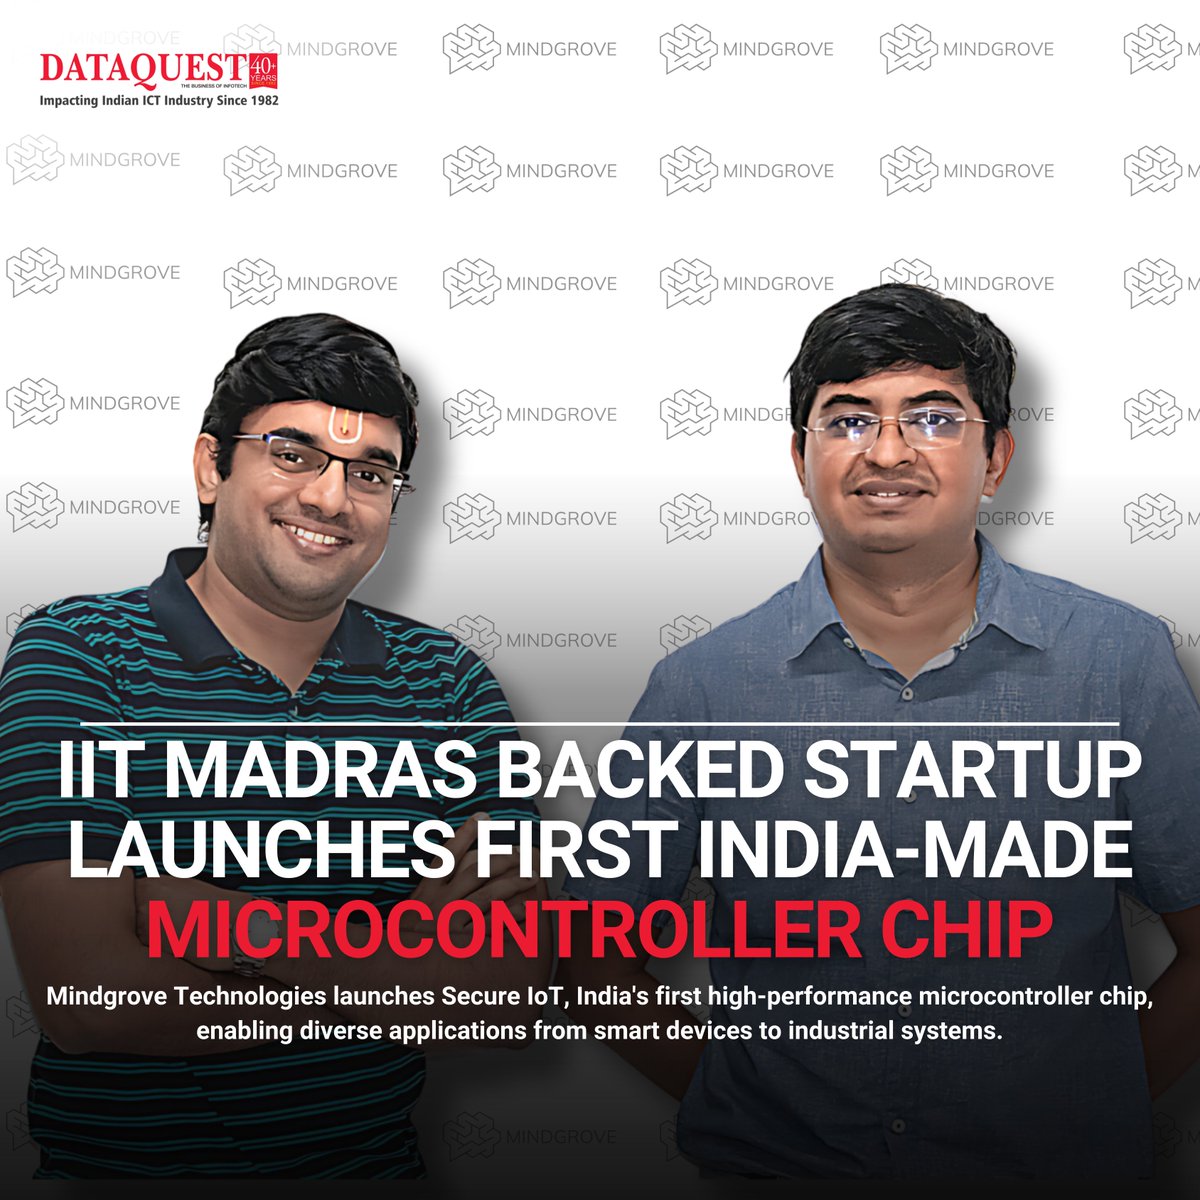 Mindgrove Technologies, an IIT Madras incubated startup, has launched Secure IoT, India's first indigenous high-performance microcontroller chip. 

#securi #fabless #semiconductor #startup #SoC #RISCV #IoT #wearables #EV #smartcity #connectedhome #smartdevices #costefficiency